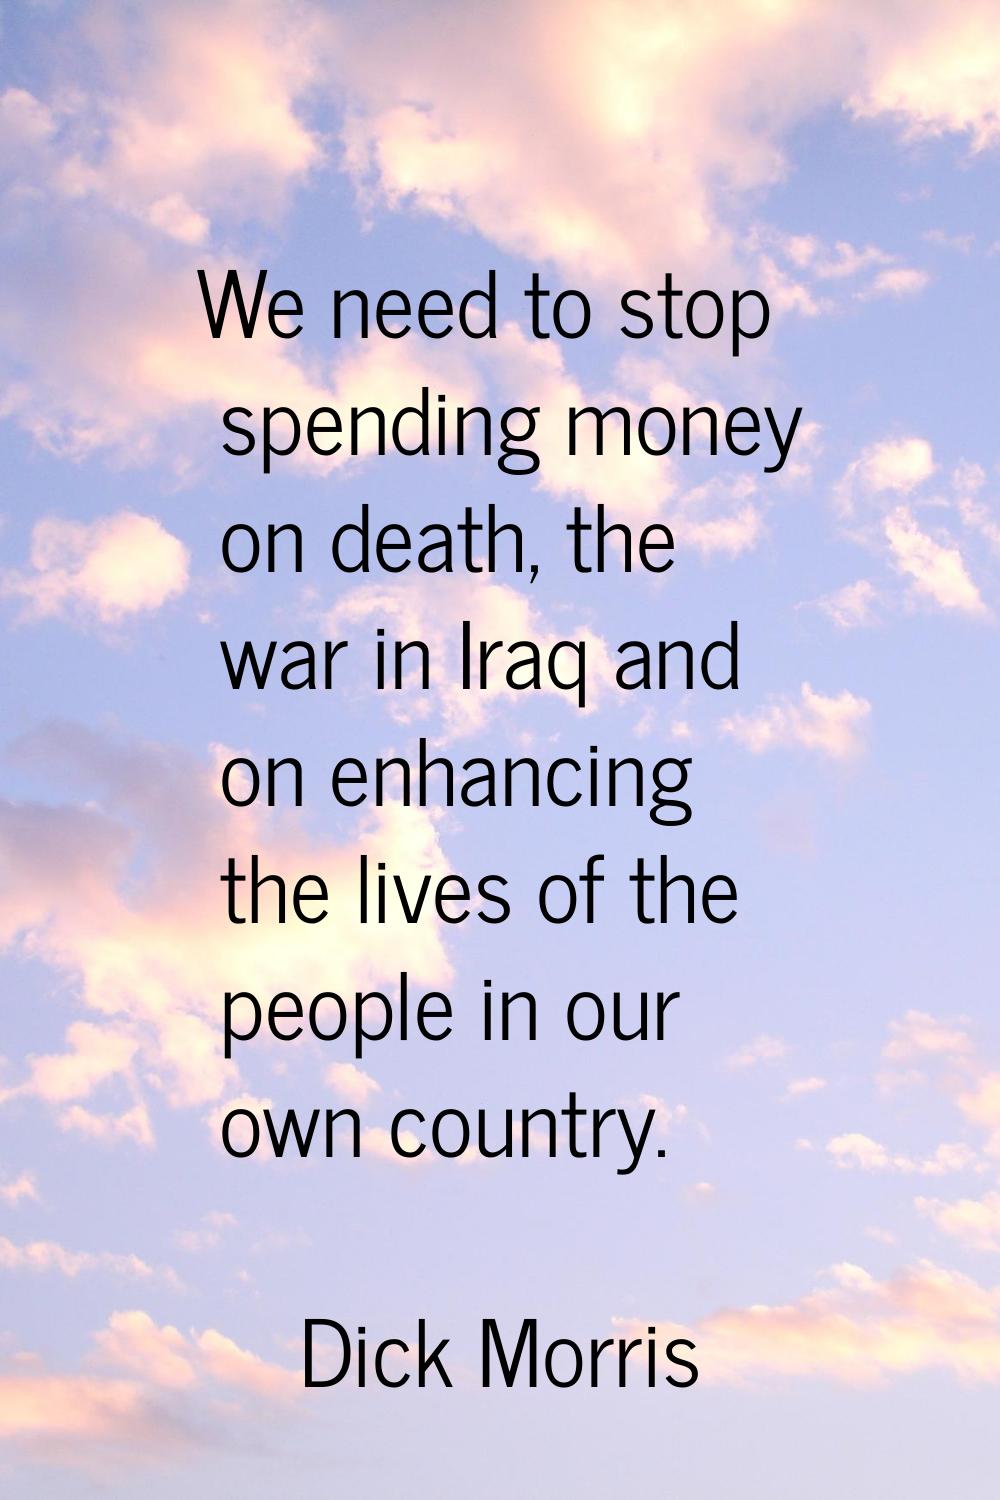 We need to stop spending money on death, the war in Iraq and on enhancing the lives of the people i